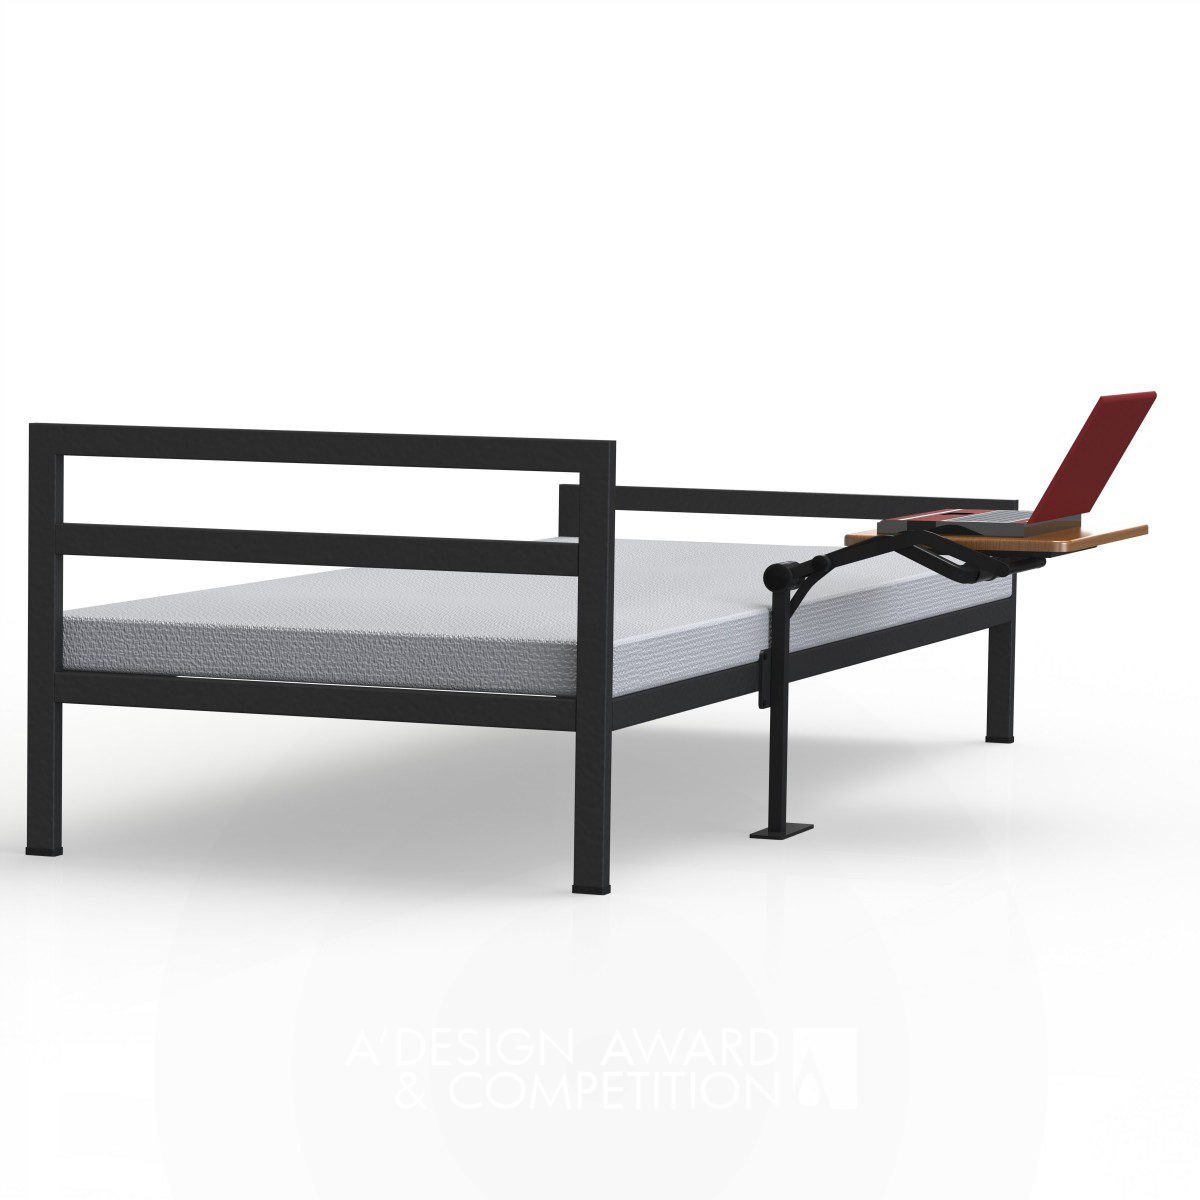 Ergo-table for bed Attachable Swing-away table